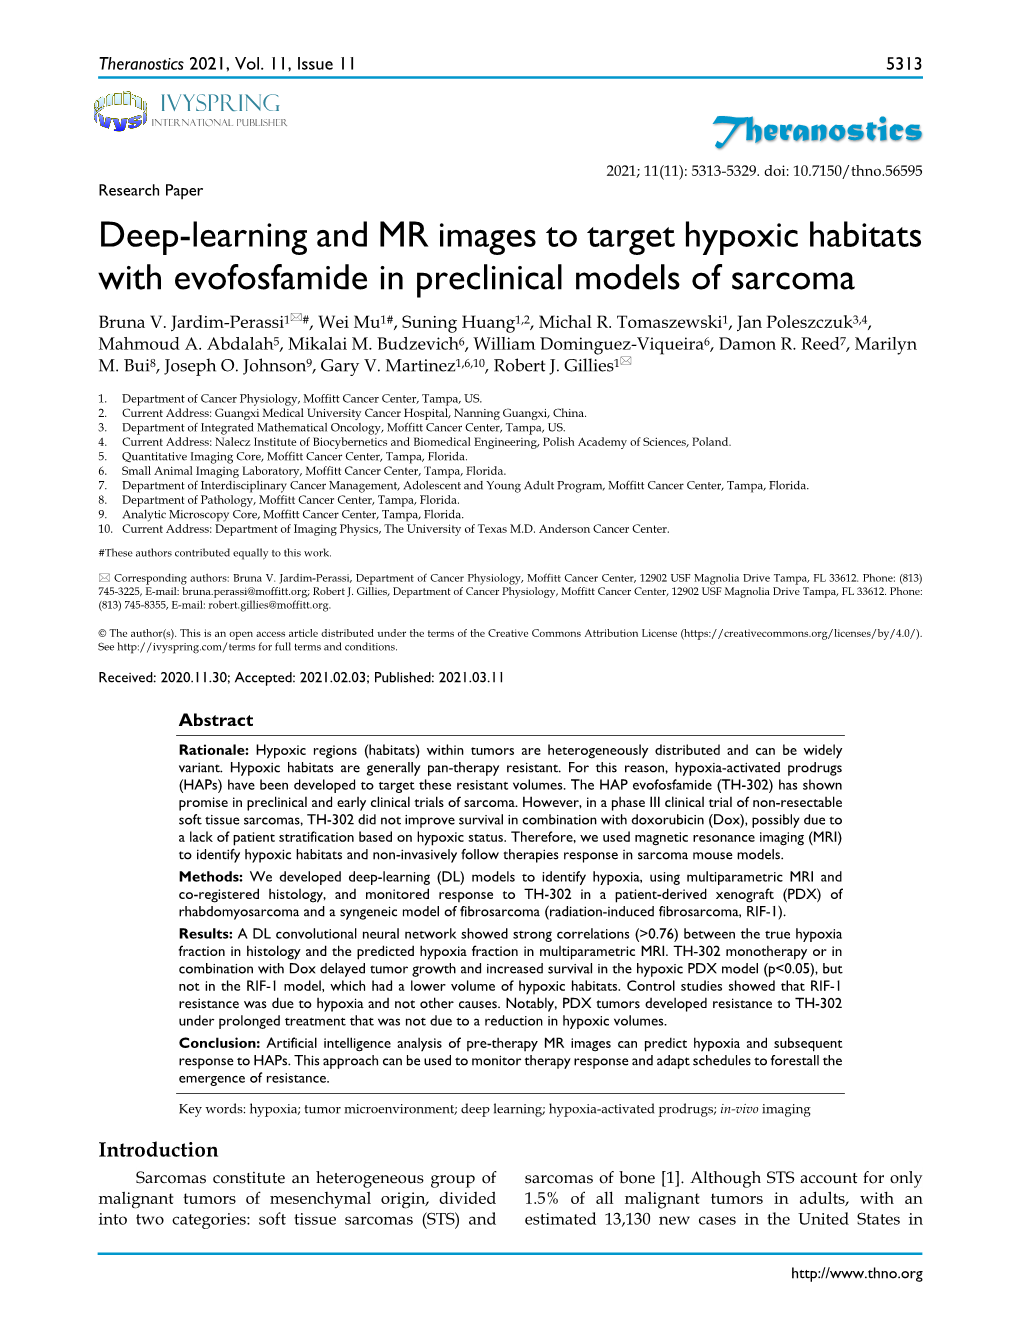 Theranostics Deep-Learning and MR Images to Target Hypoxic Habitats